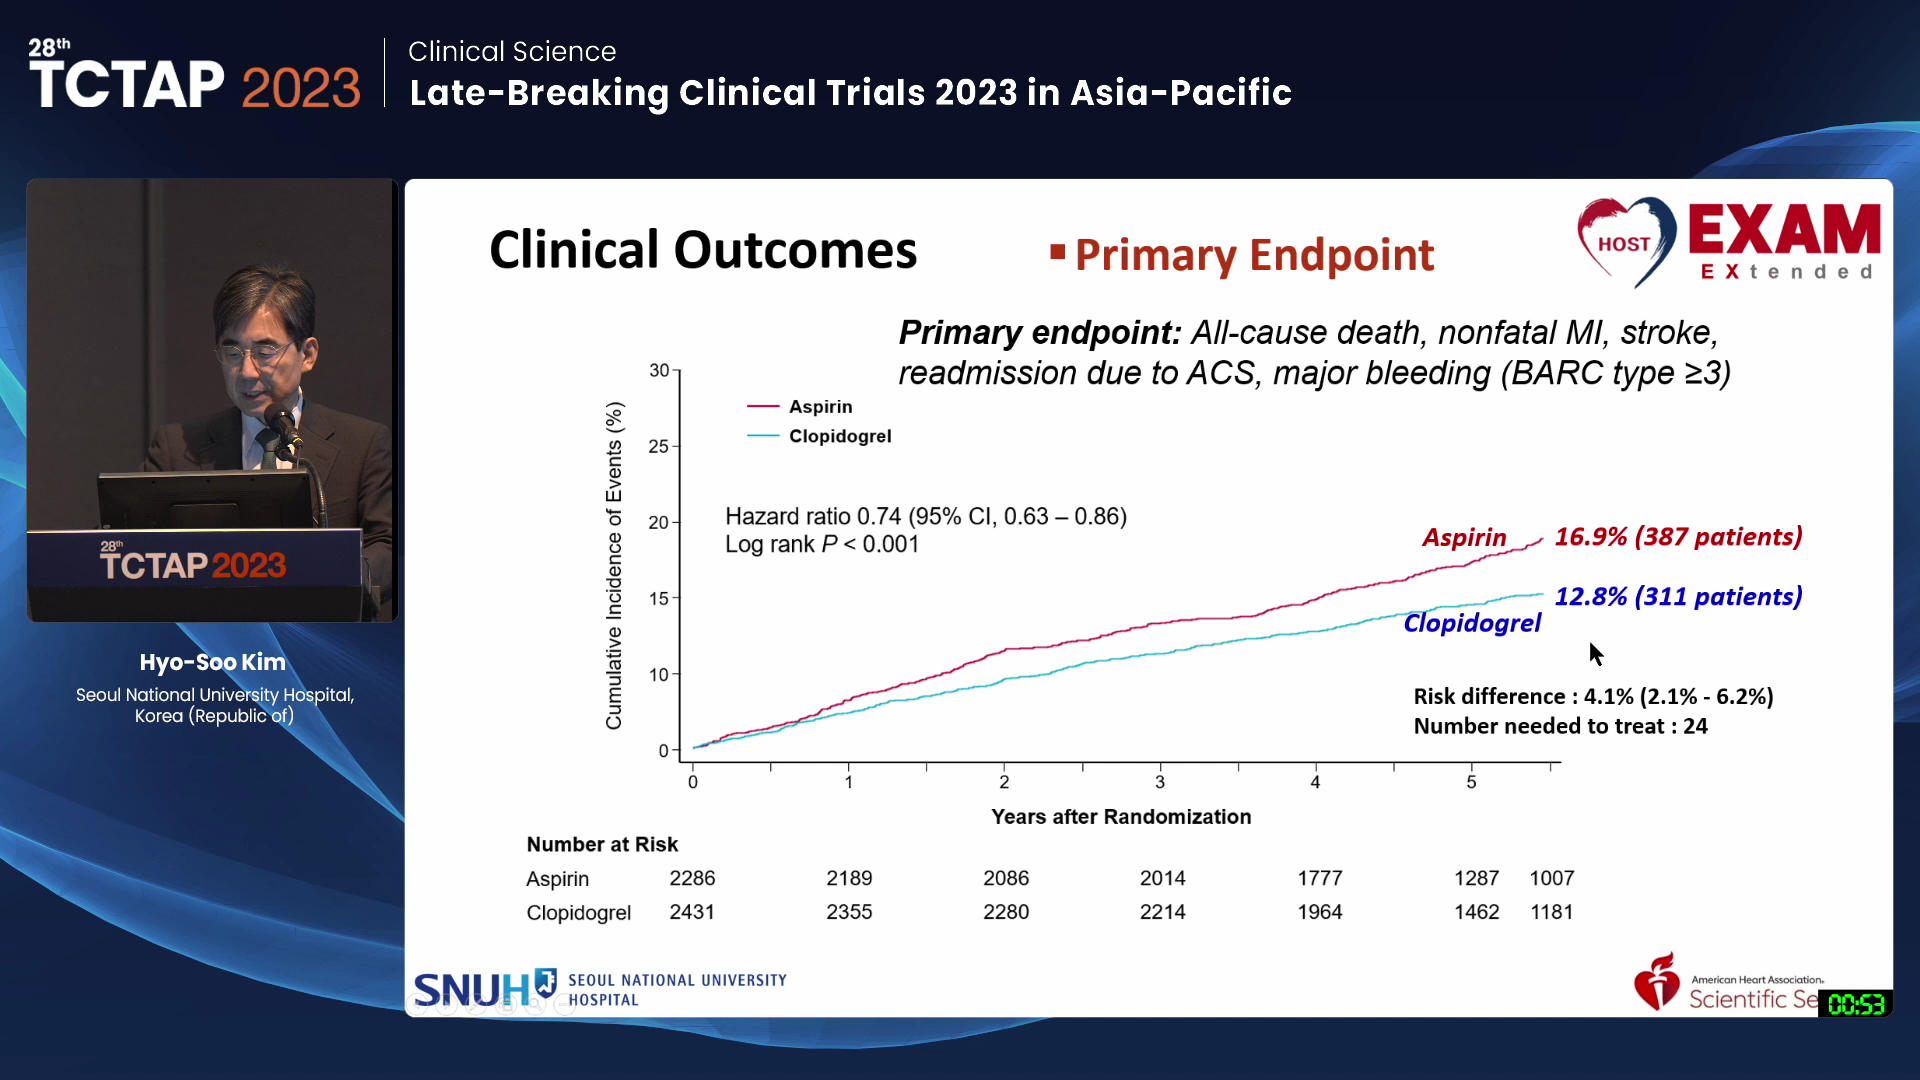 [Clinical Science] Late-Breaking Clinical Trials 2023 in Asia-Pacific